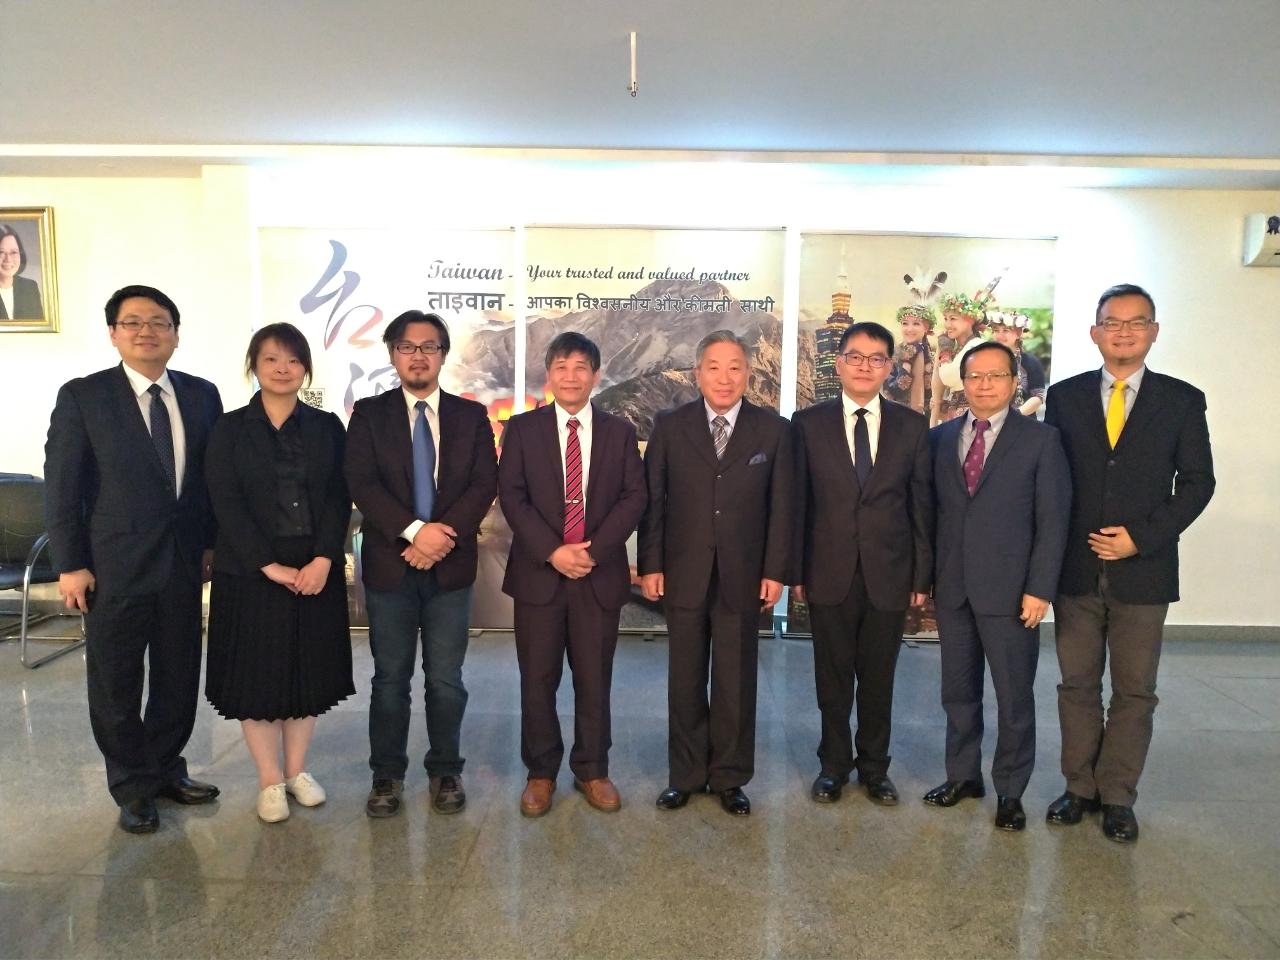 Mr. Cheng (Right 5) and the delegation called on Amb. Tien (Right 4) at TECC, accompanied by staff of TECC.